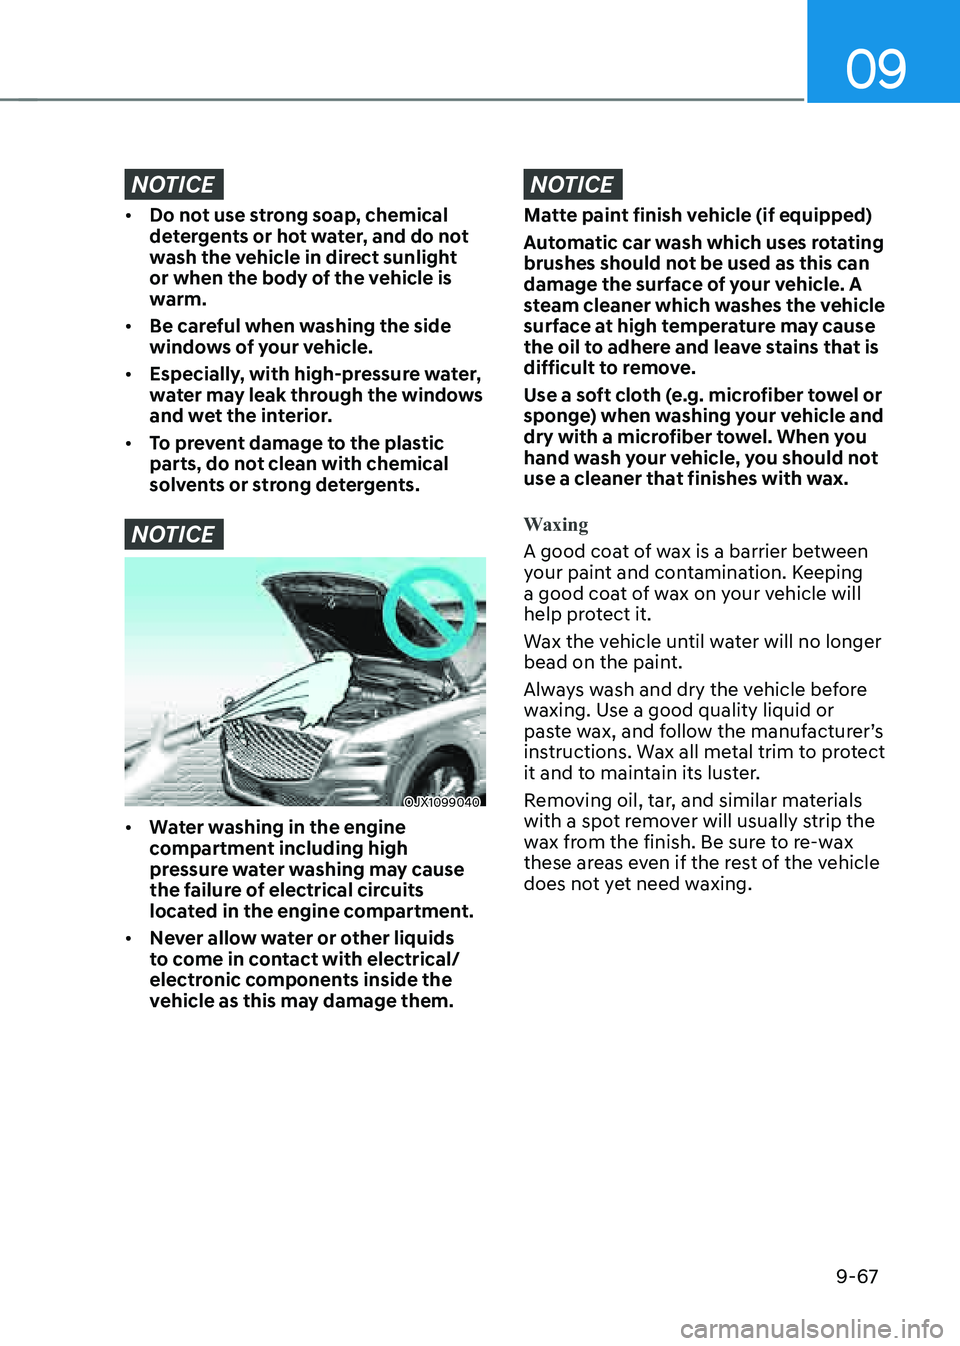 GENESIS GV80 2021  Owners Manual 09
9-67
NOTICE
• Do not use strong soap, chemical 
detergents or hot water, and do not 
wash the vehicle in direct sunlight 
or when the body of the vehicle is 
warm.
• Be careful when washing the